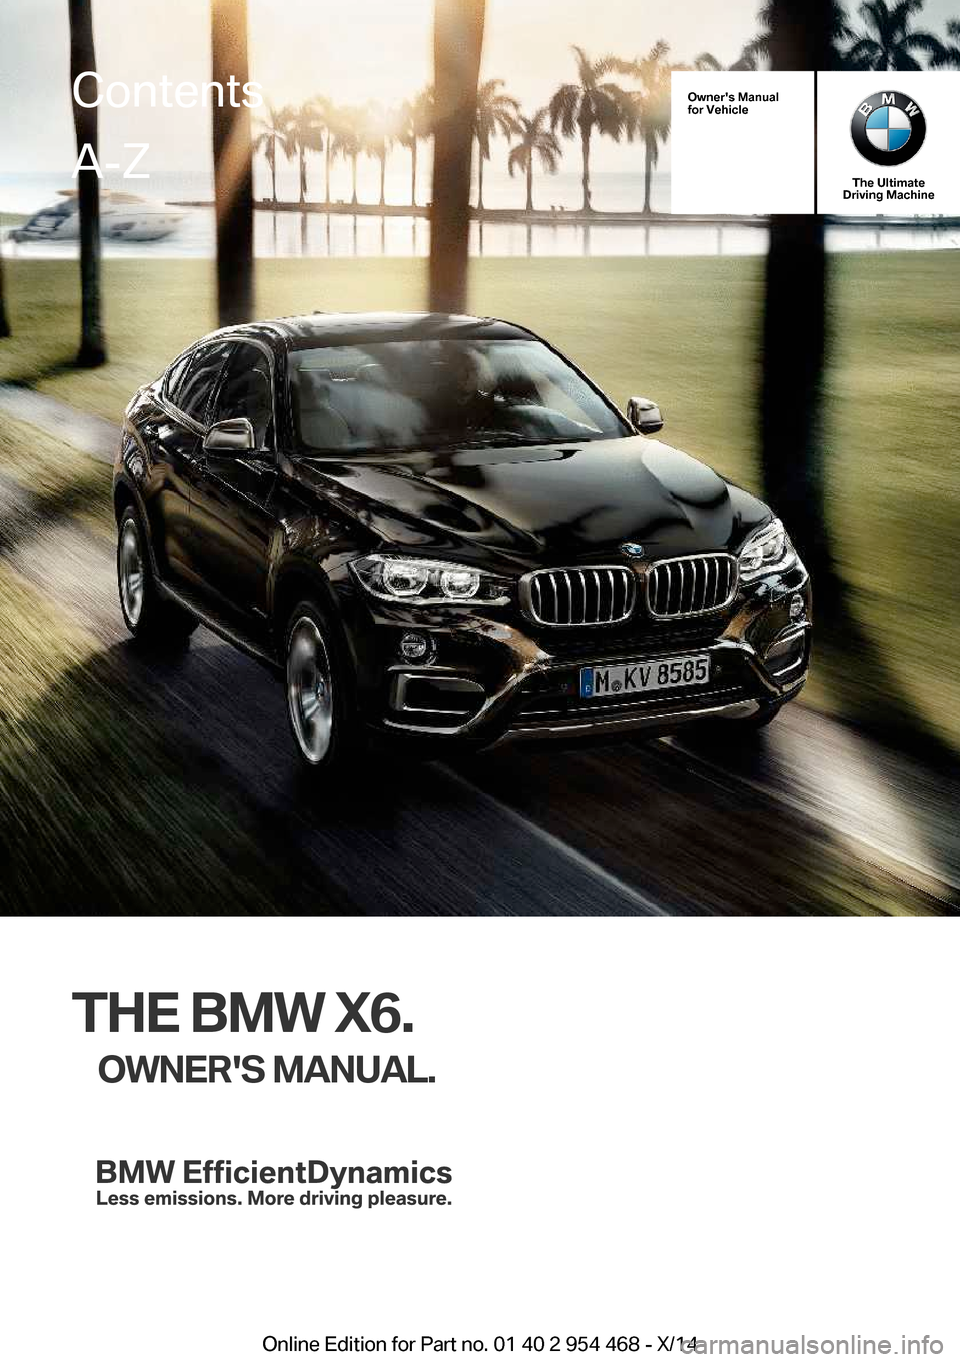 BMW X6 2014 F16 Owners Manual Owners Manual
for Vehicle
The Ultimate
Driving Machine
THE BMW X6.
OWNERS MANUAL.
ContentsA-Z
Online Edition for Part no. 01 40 2 954 468 - X/14   